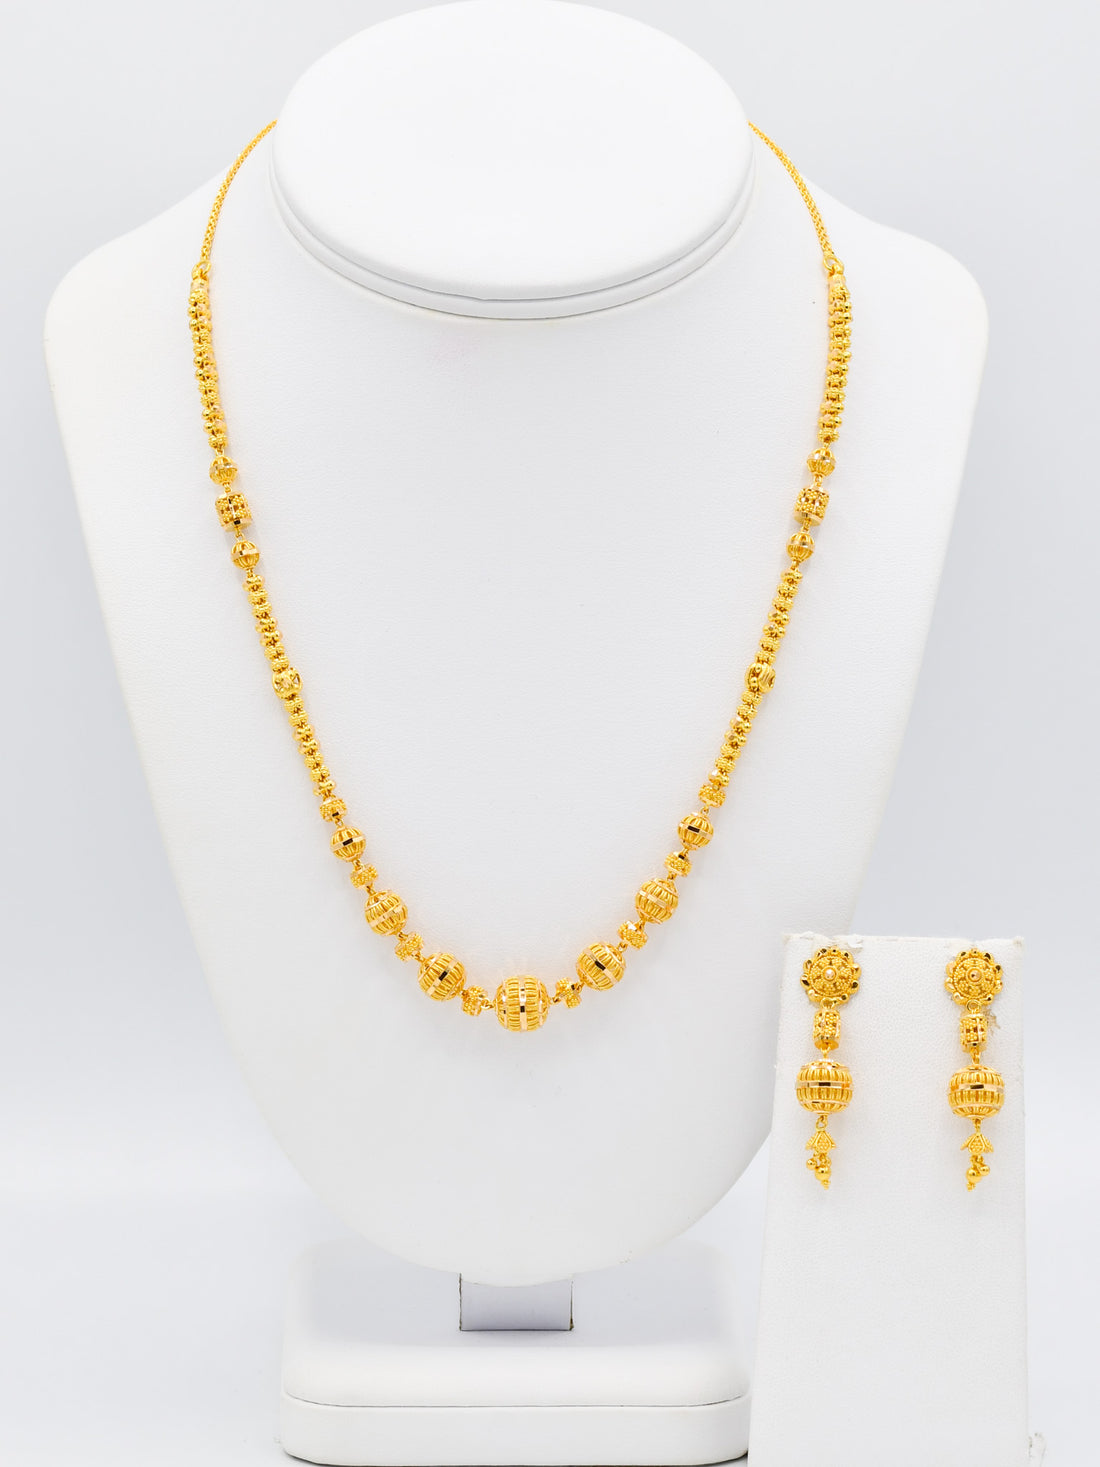 22ct Gold Ball Necklace Set - Roop Darshan